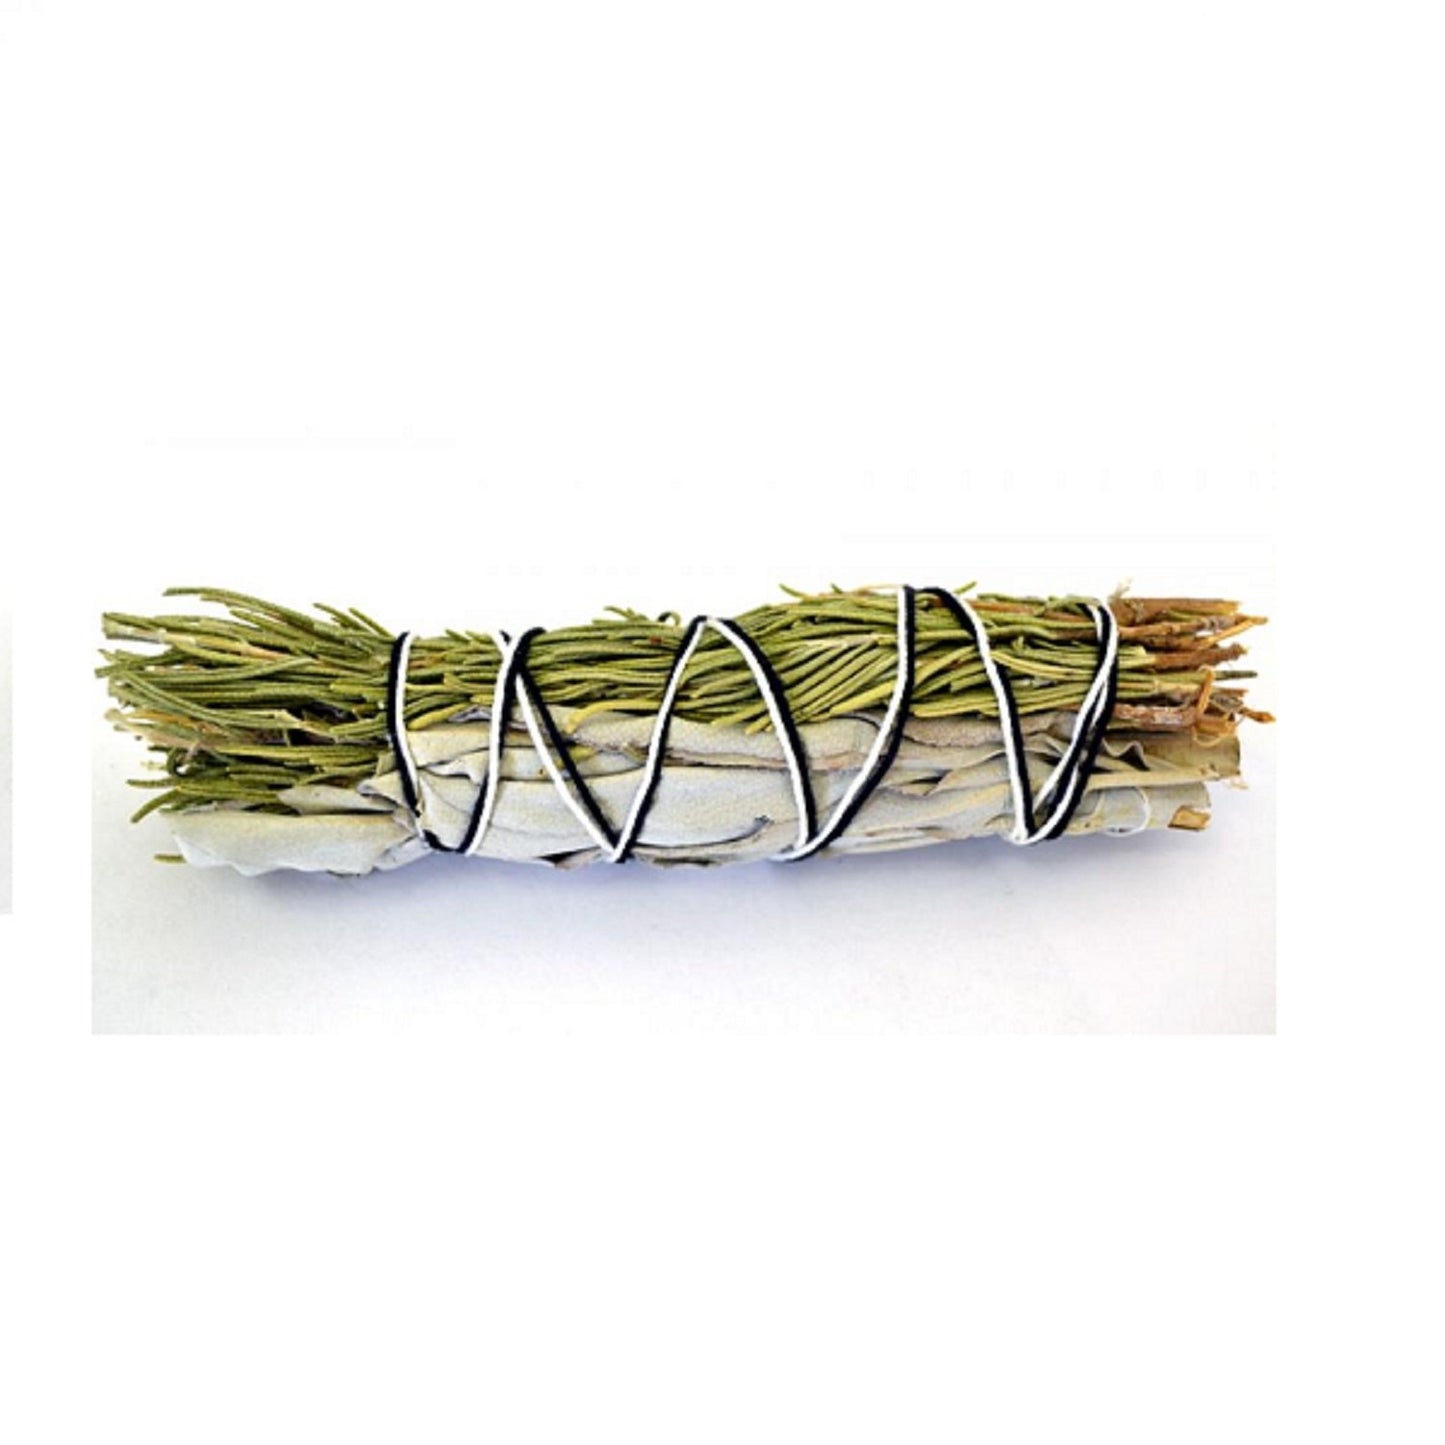 White Sage and Rosemary Smudge Stick 3-4"